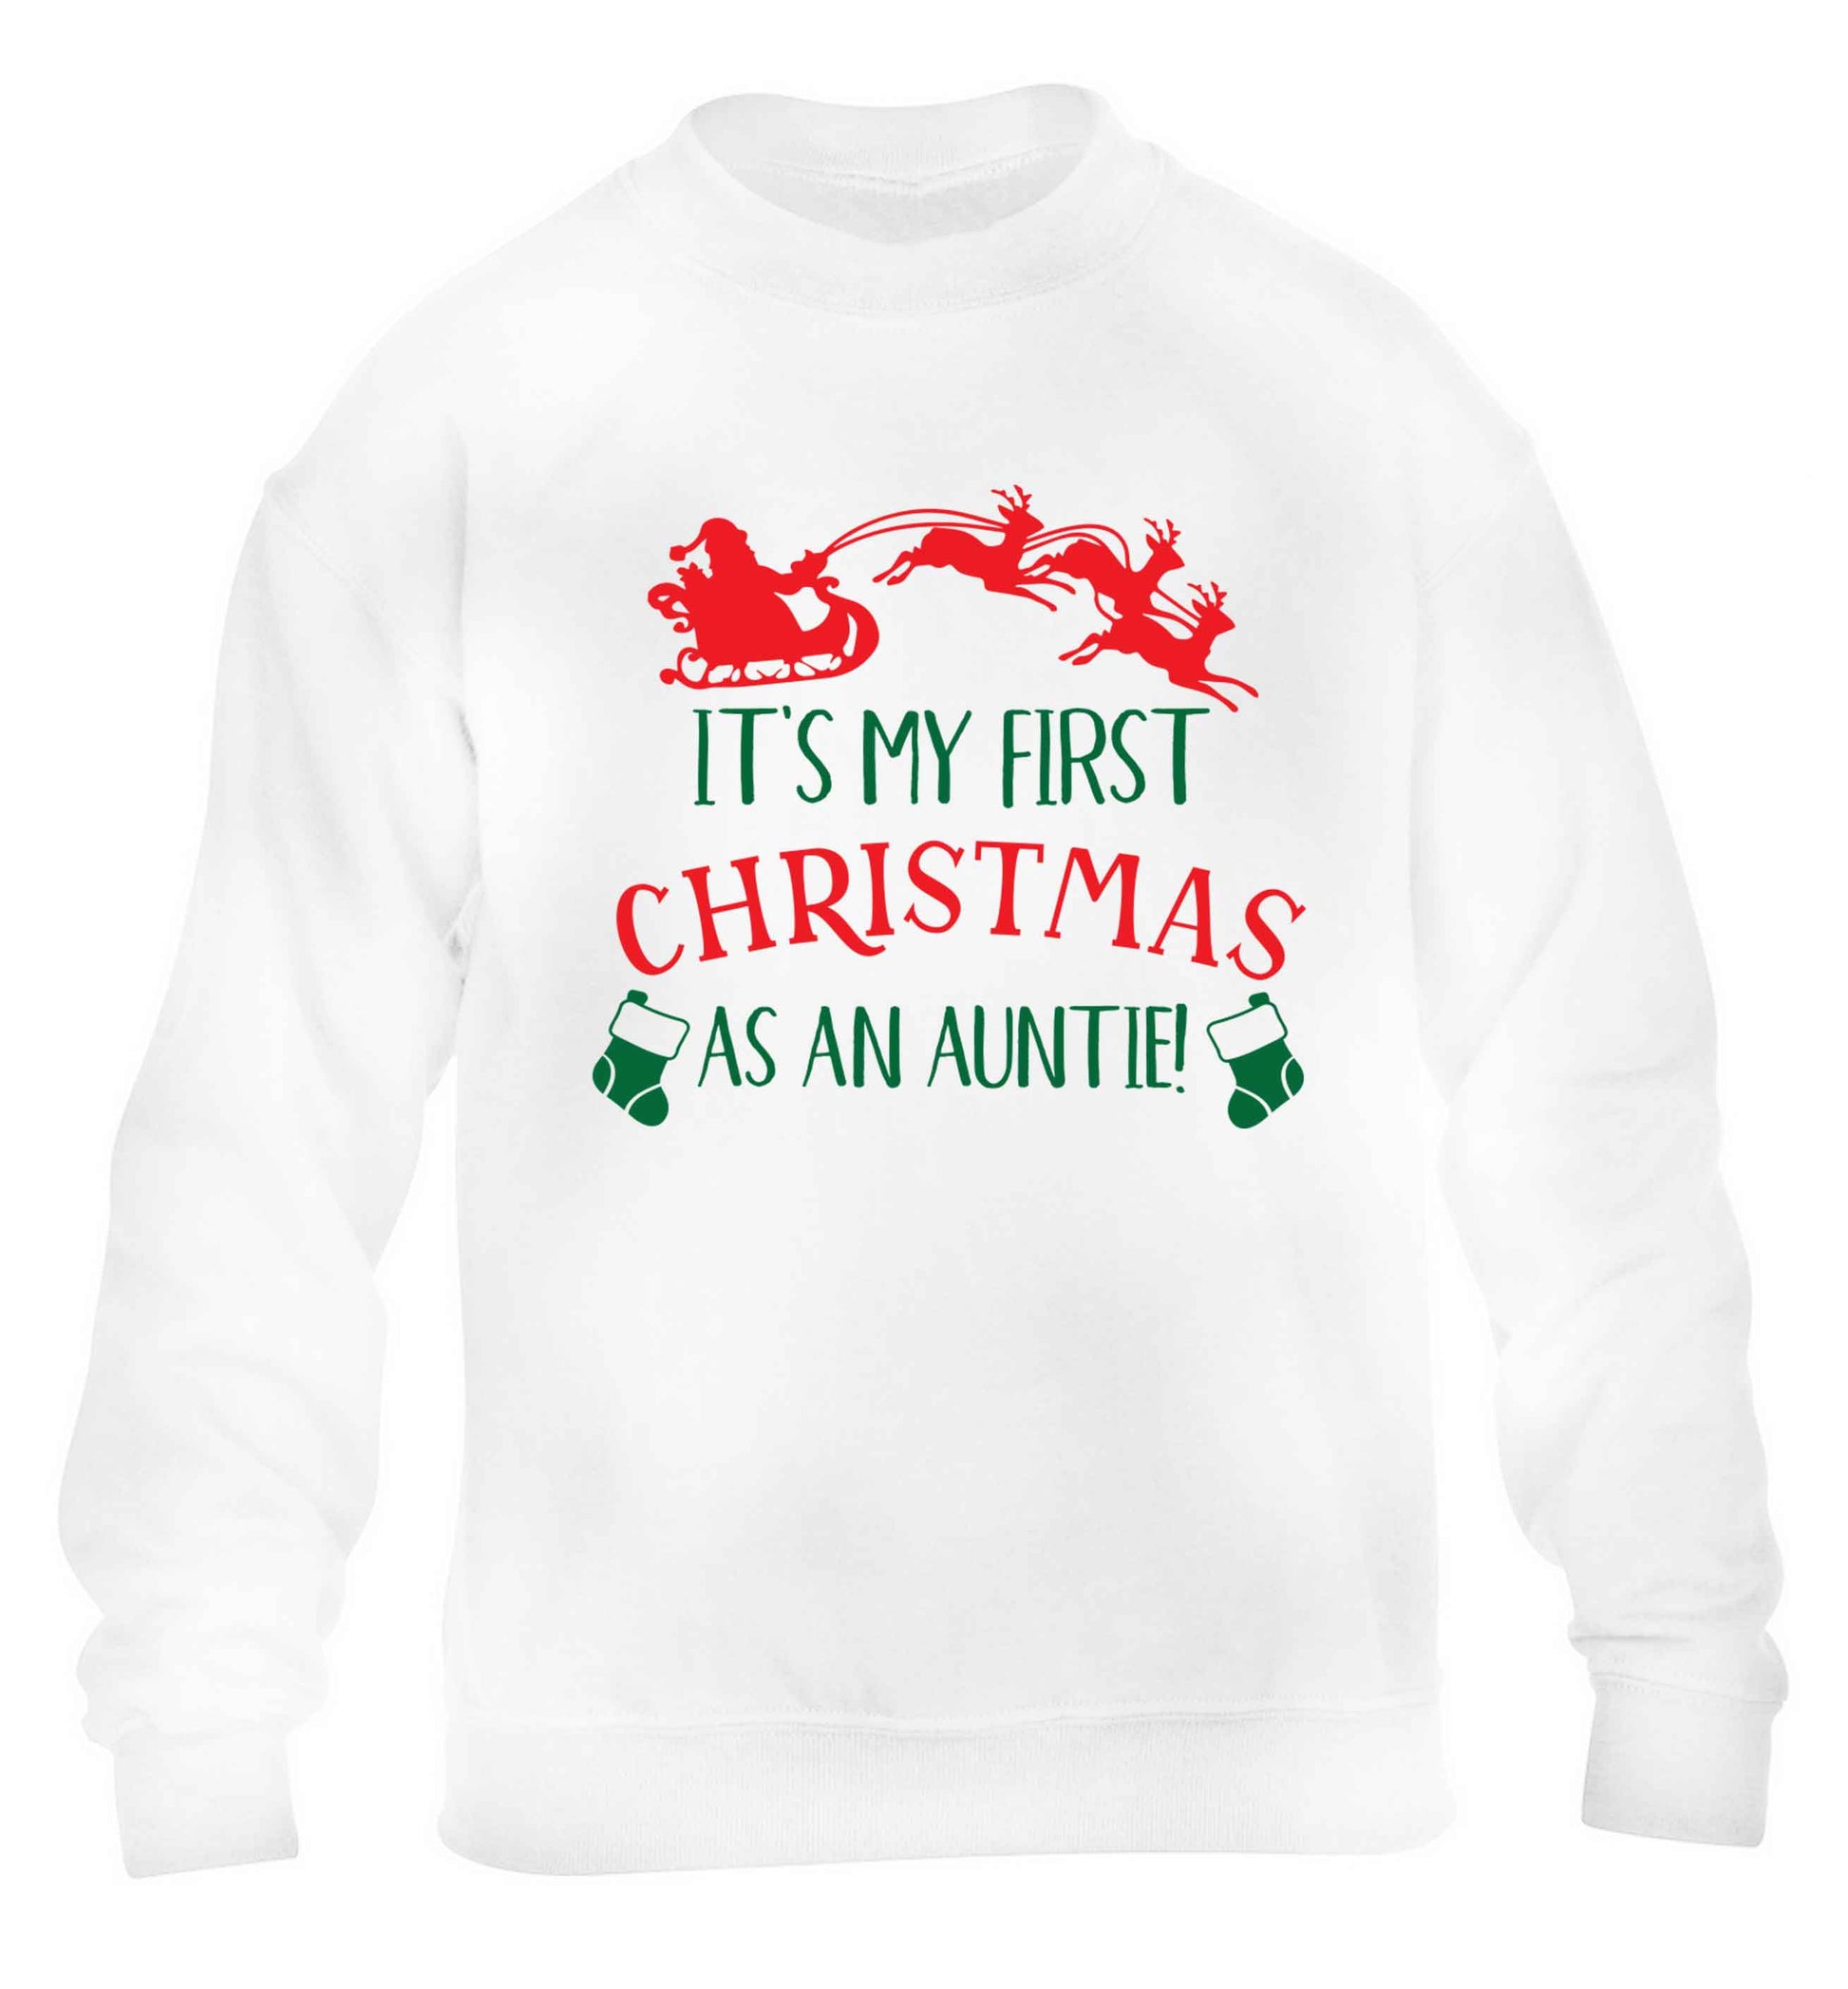 It's my first Christmas as an auntie! children's white sweater 12-13 Years